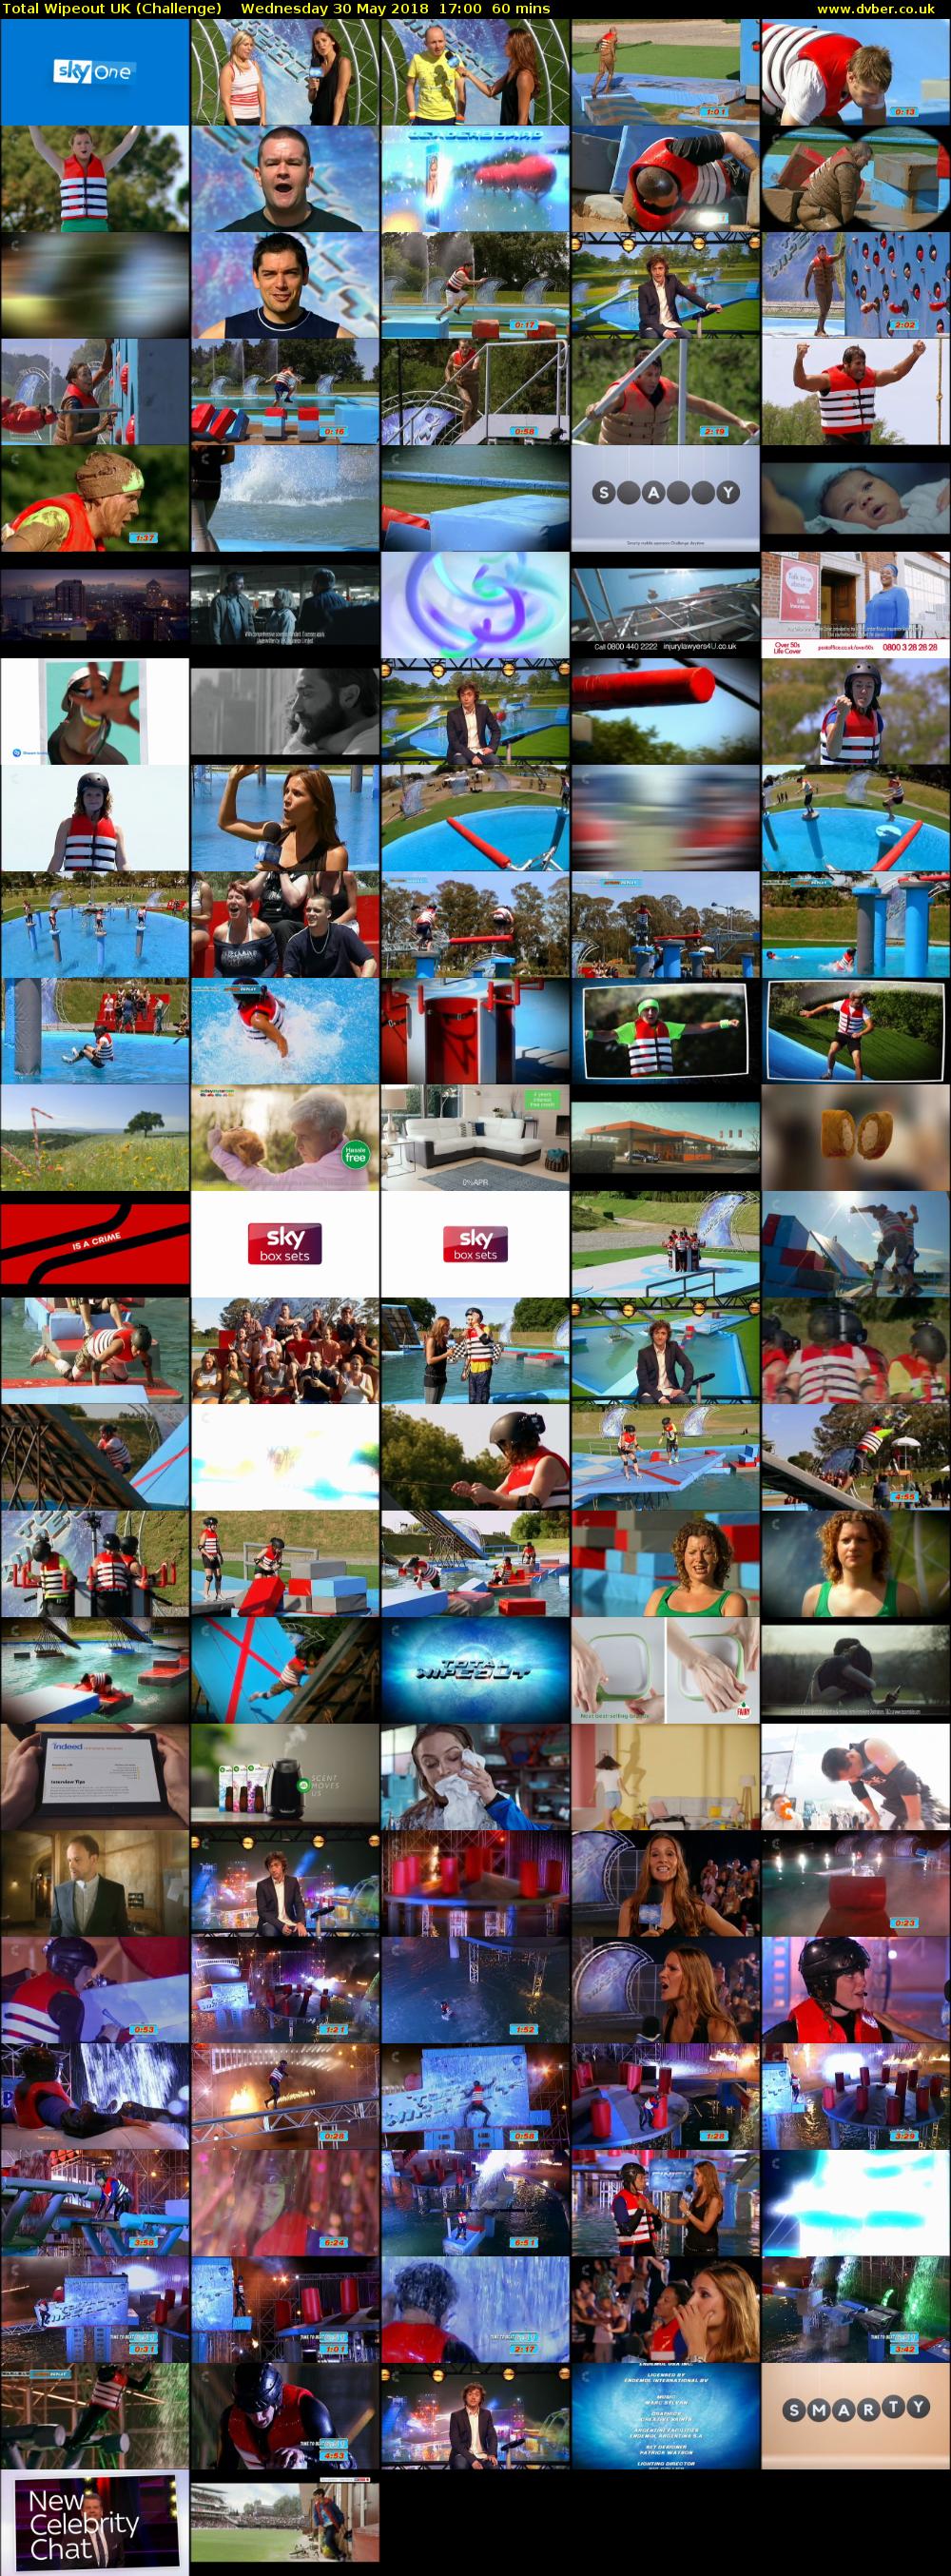 Total Wipeout UK (Challenge) Wednesday 30 May 2018 17:00 - 18:00